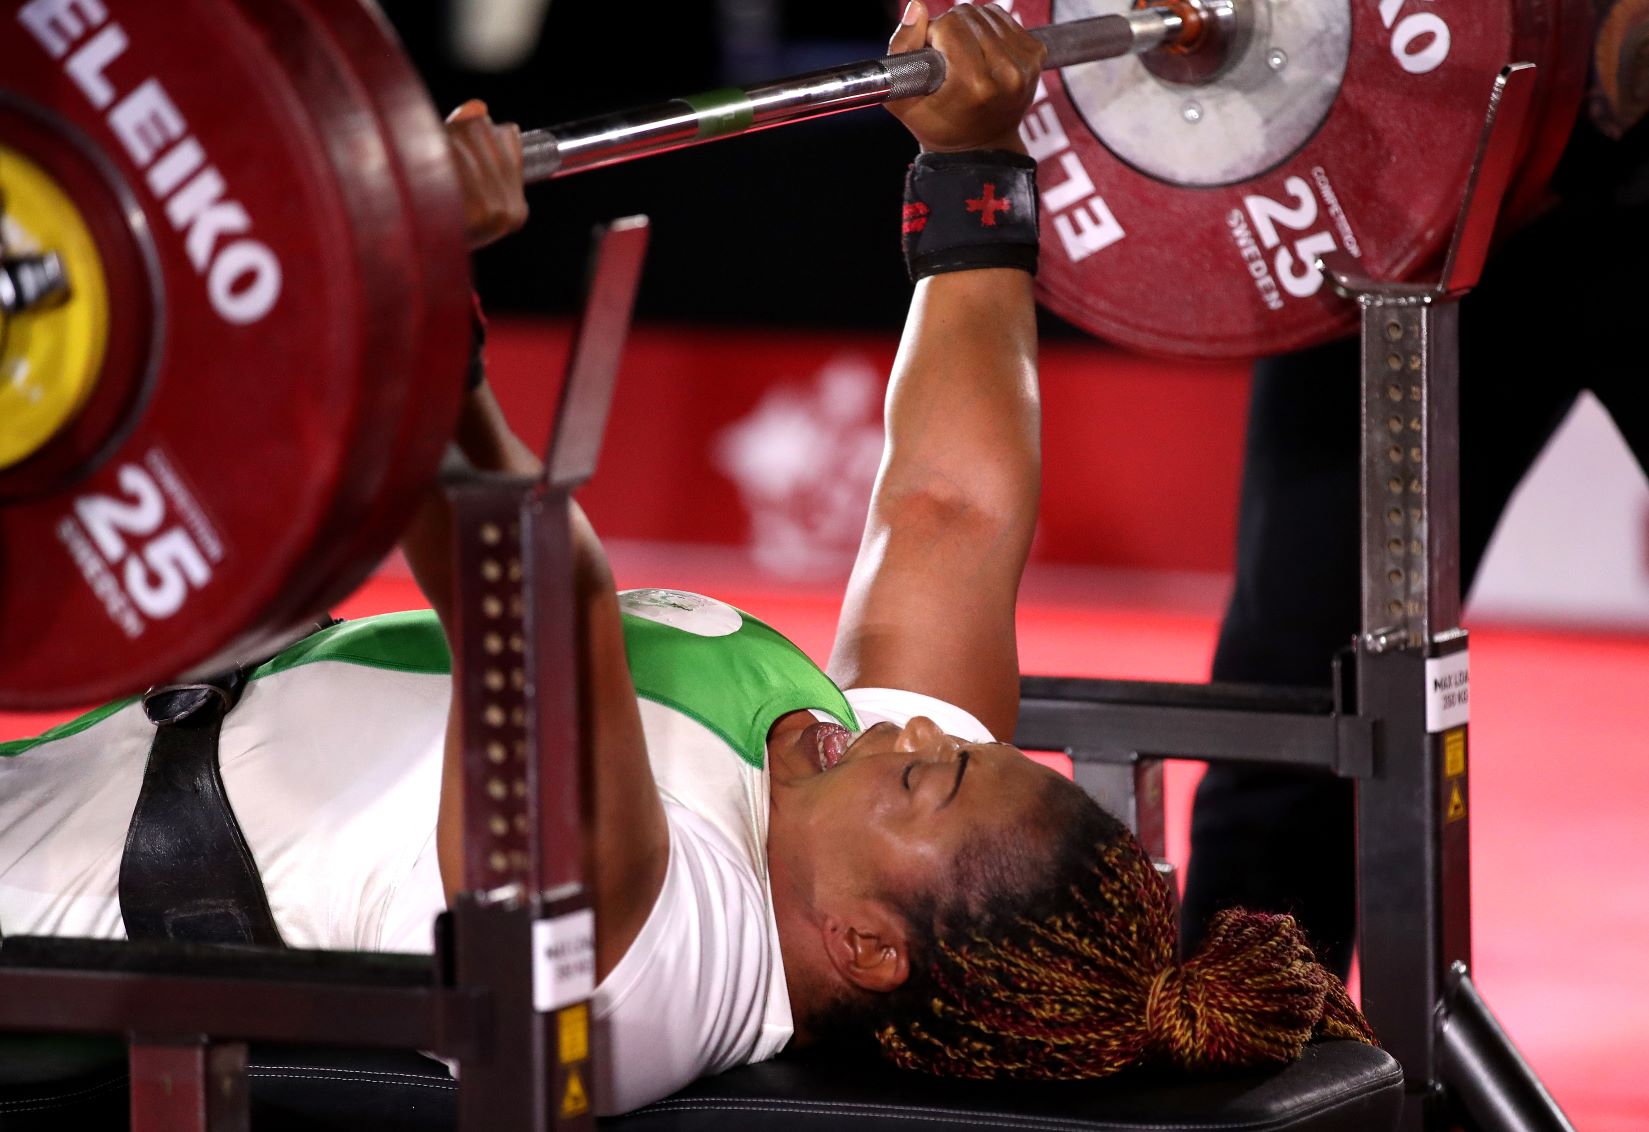 Lucy Ejike of Nigeria lifts weights during competition